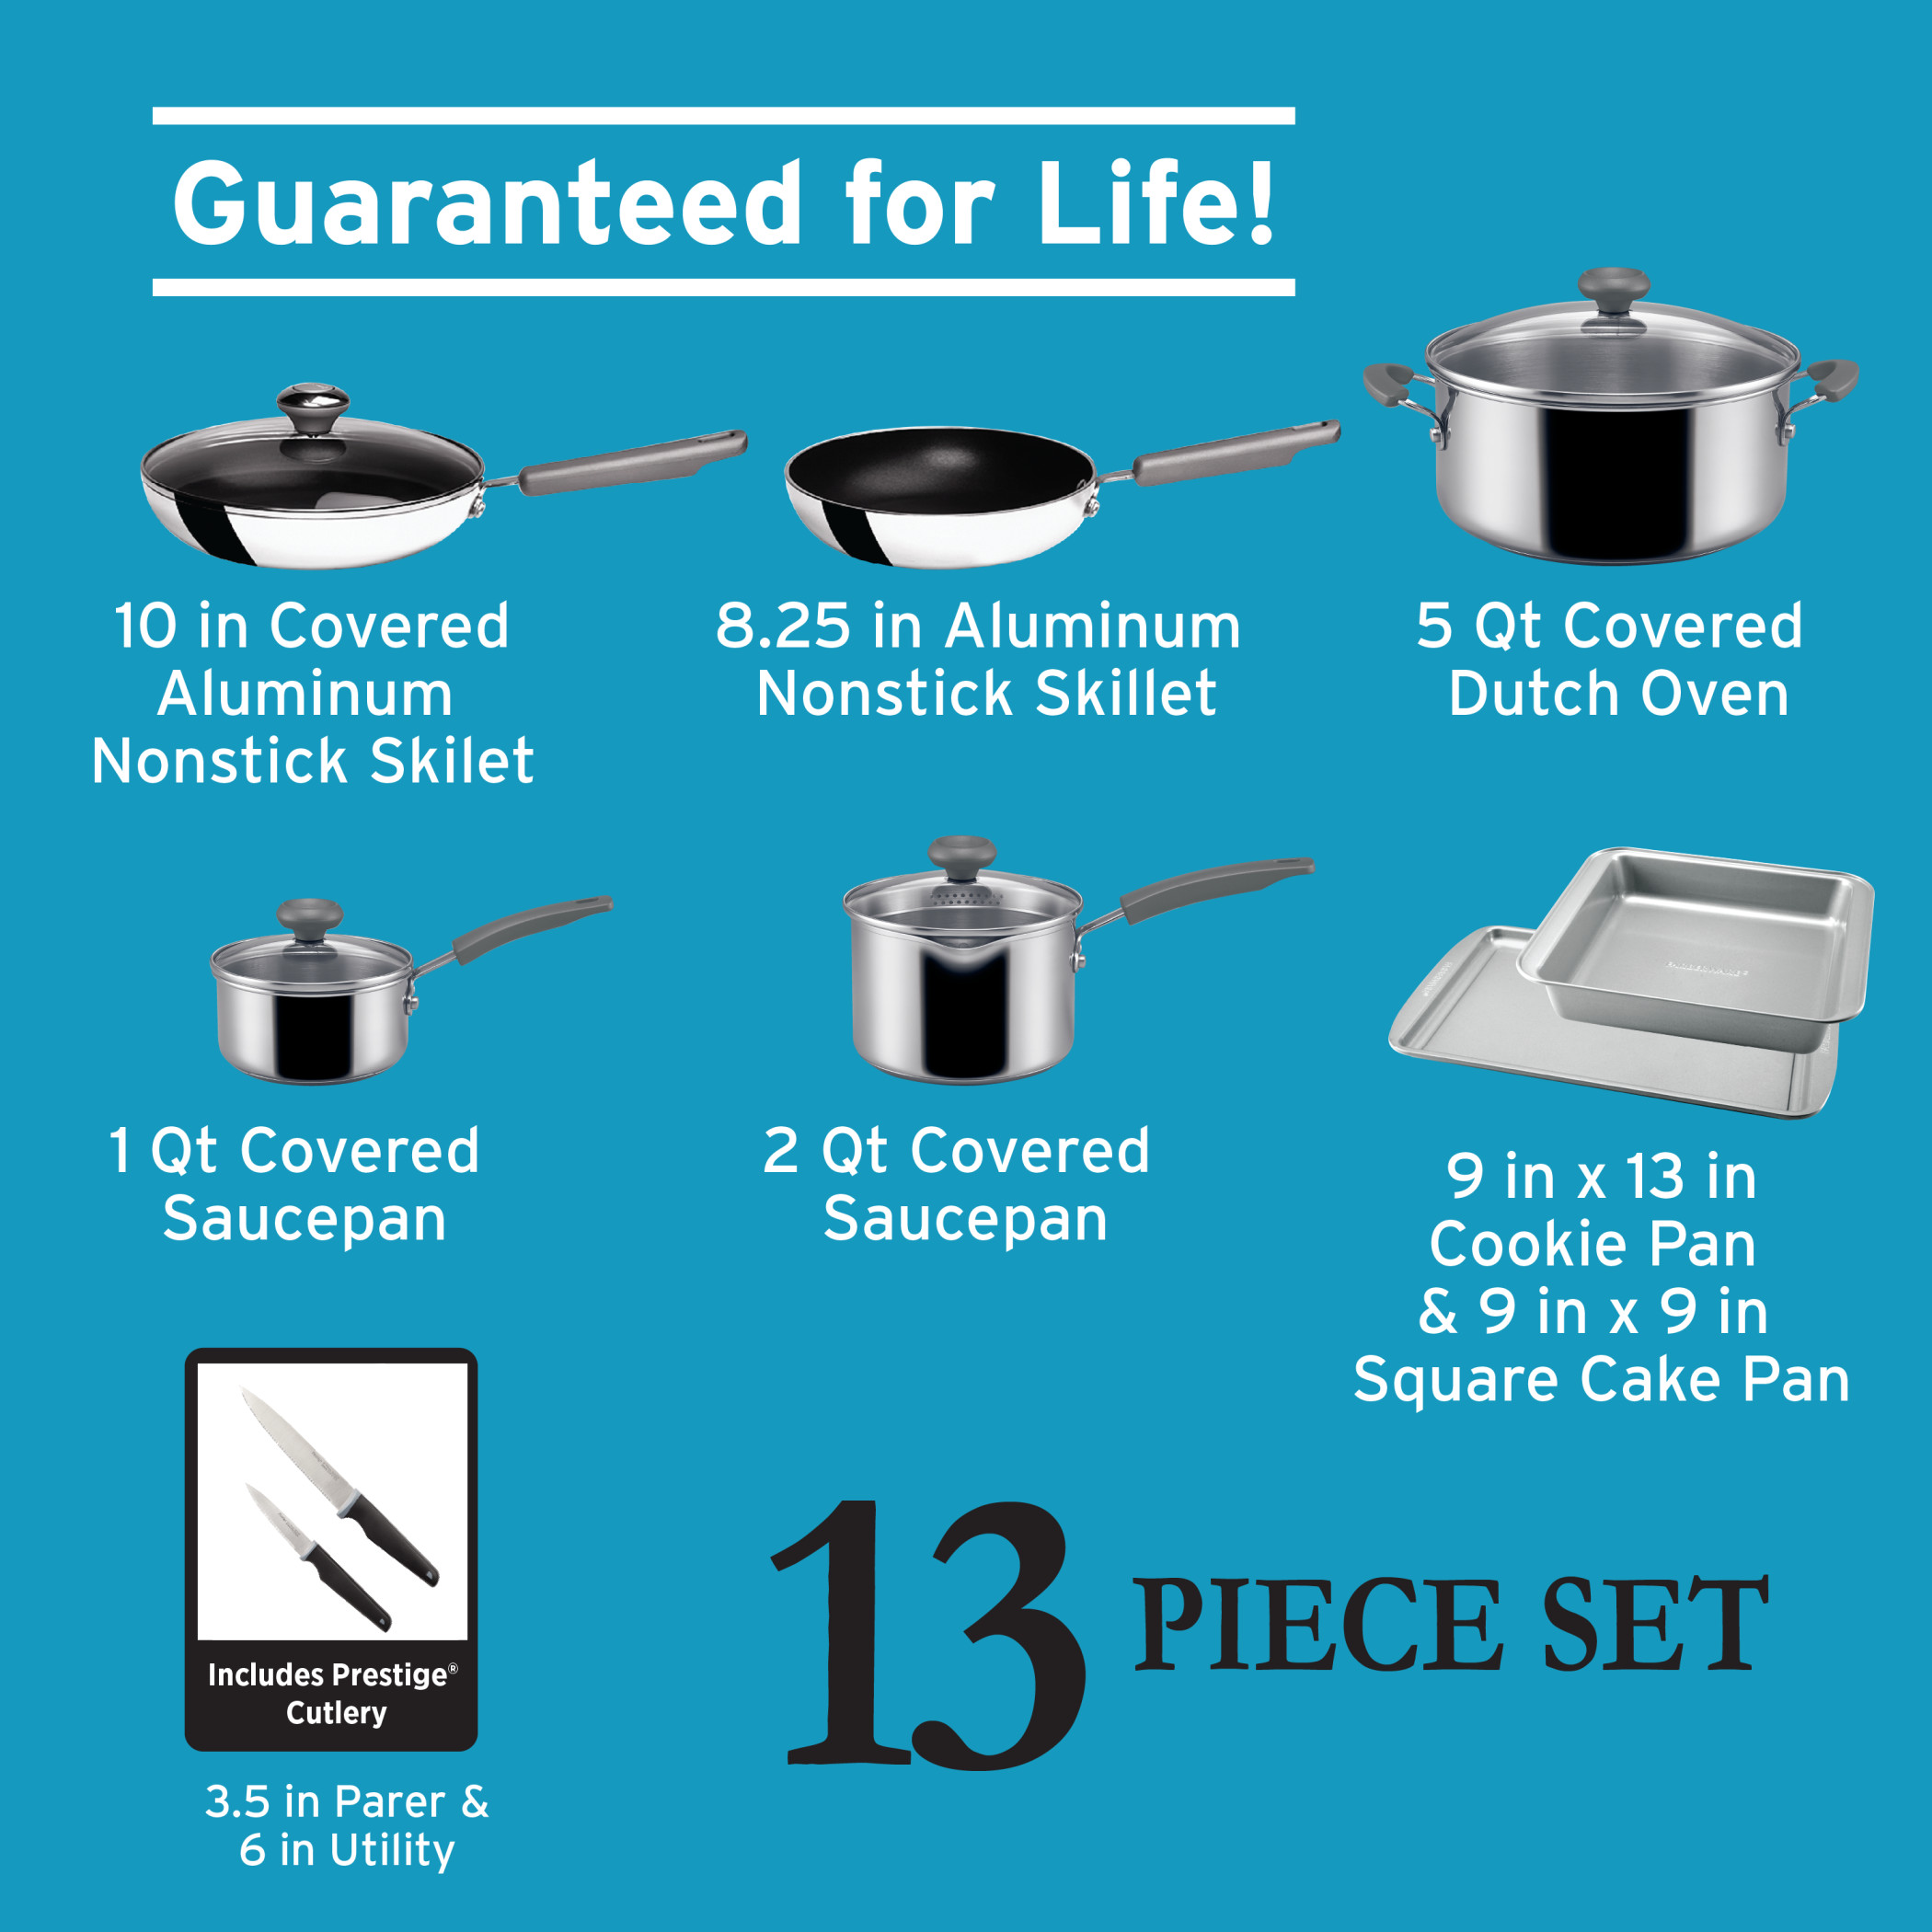 Farberware 13-Piece Complements Stainless Steel and Nonstick Pots and Pans Set/Cookware Set, Silver - image 5 of 9